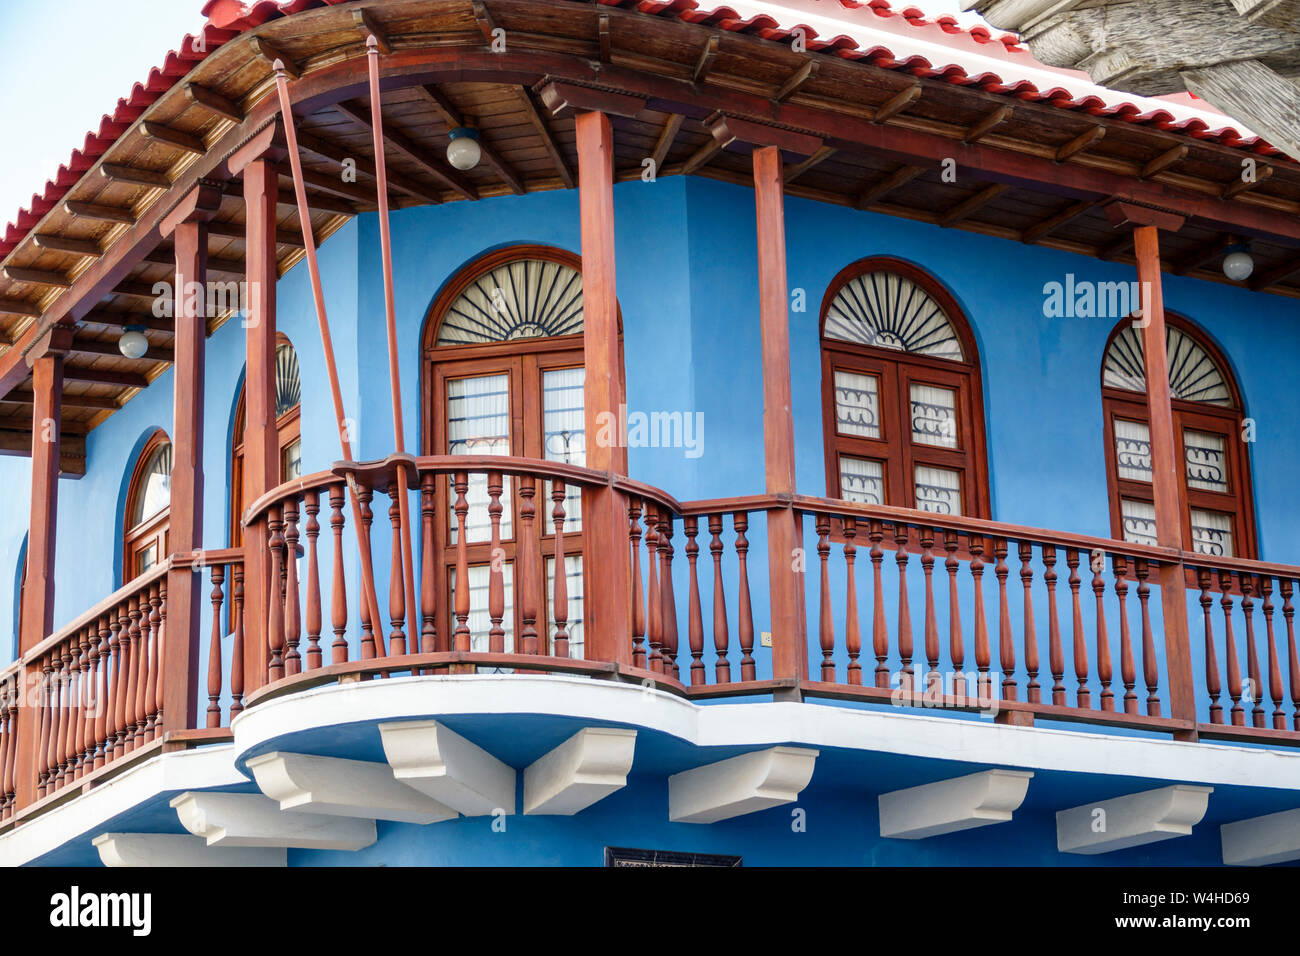 Colombia Cartagena Old Walled City Center centre historic colonial houses exterior balcony wood spindle railing restored residential apartment Stock Photo